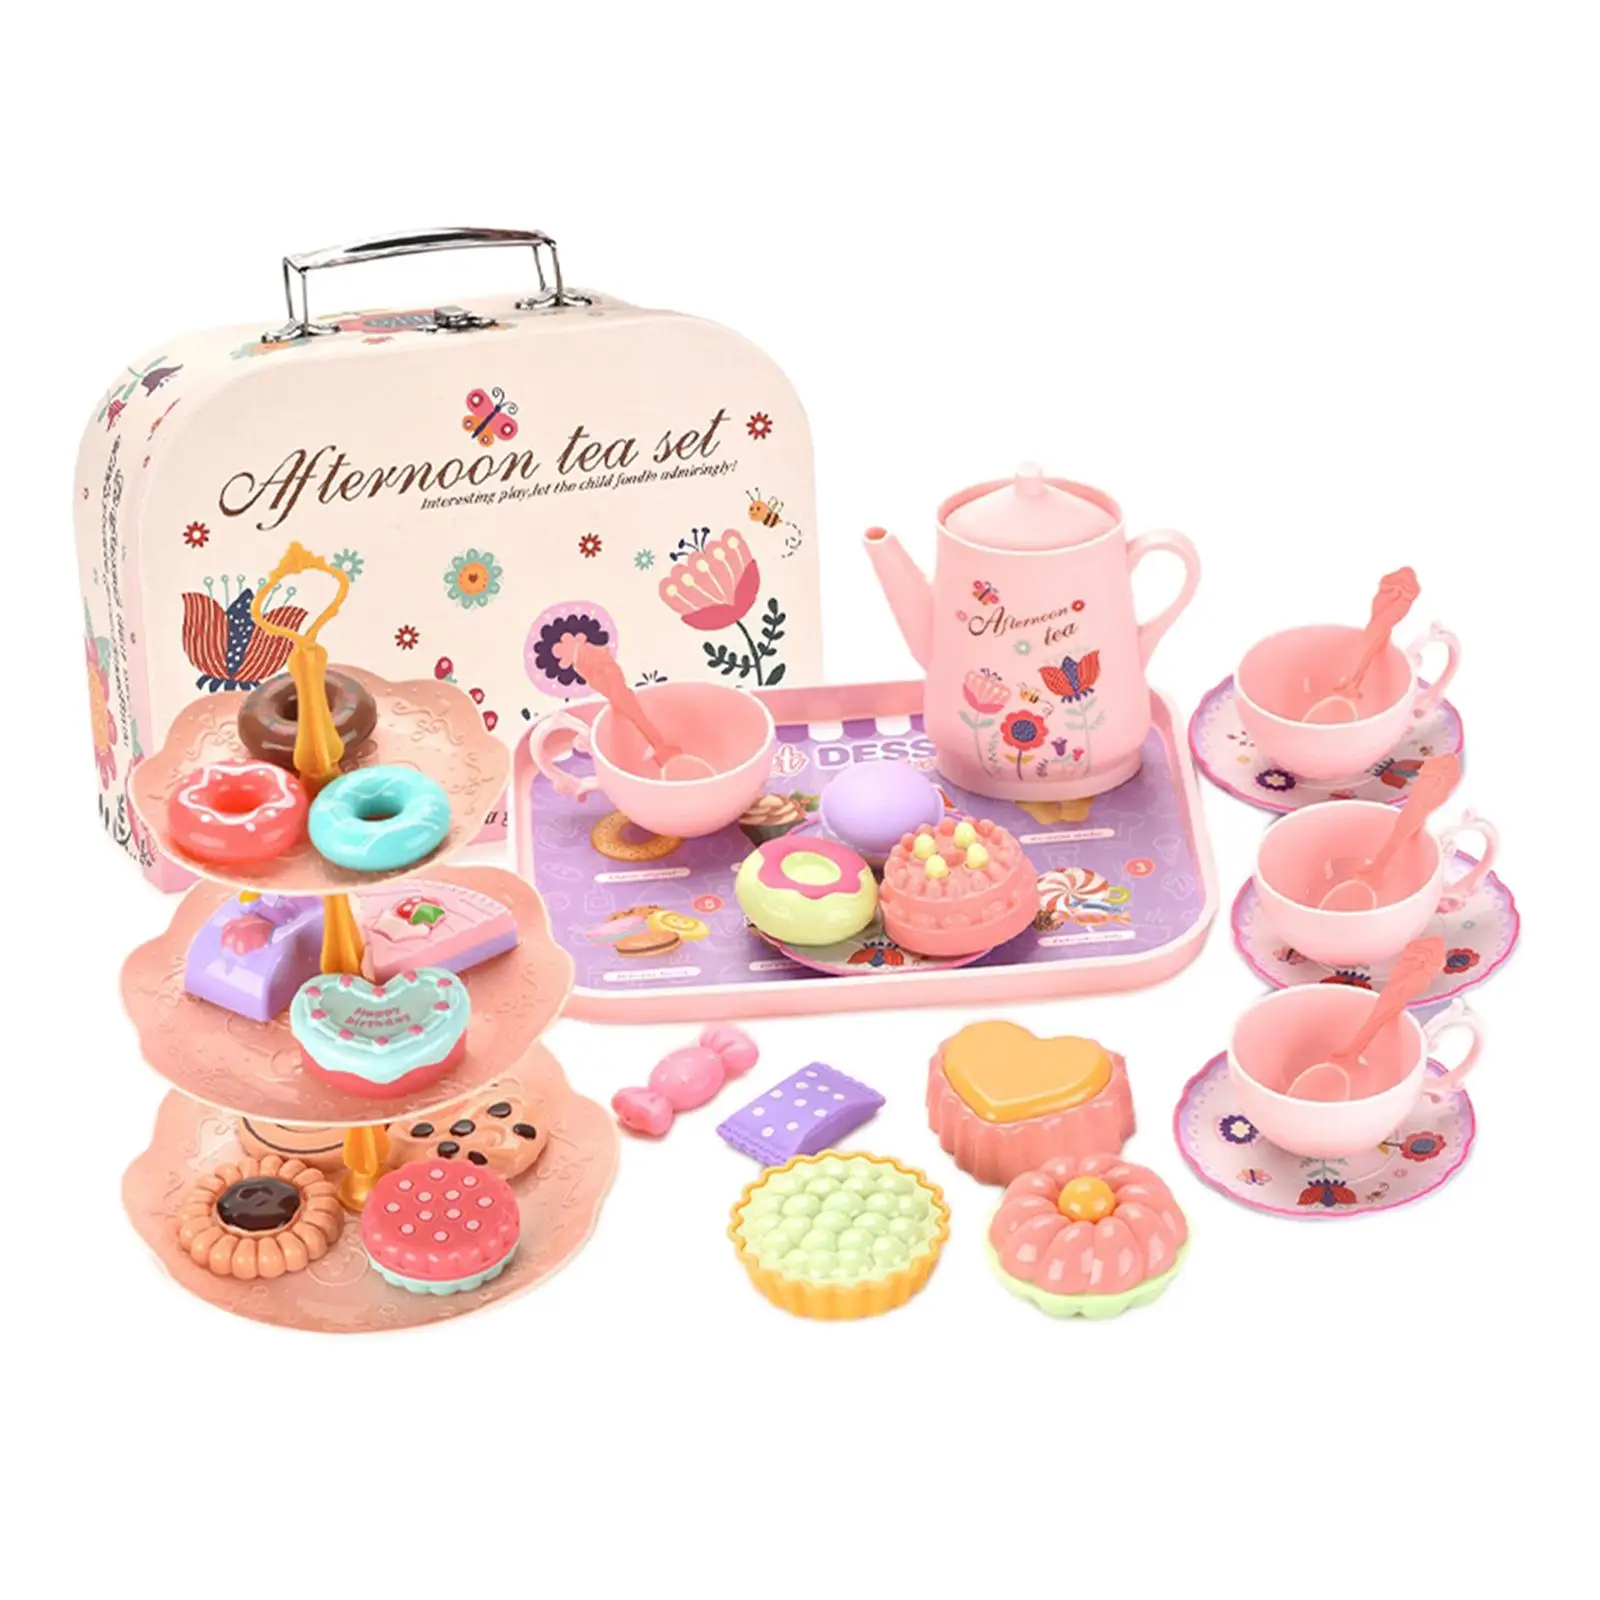 Play House Kitchen Afternoon Tea montessori Toy Girls Toys DIY Pretend Role Play for Birthday